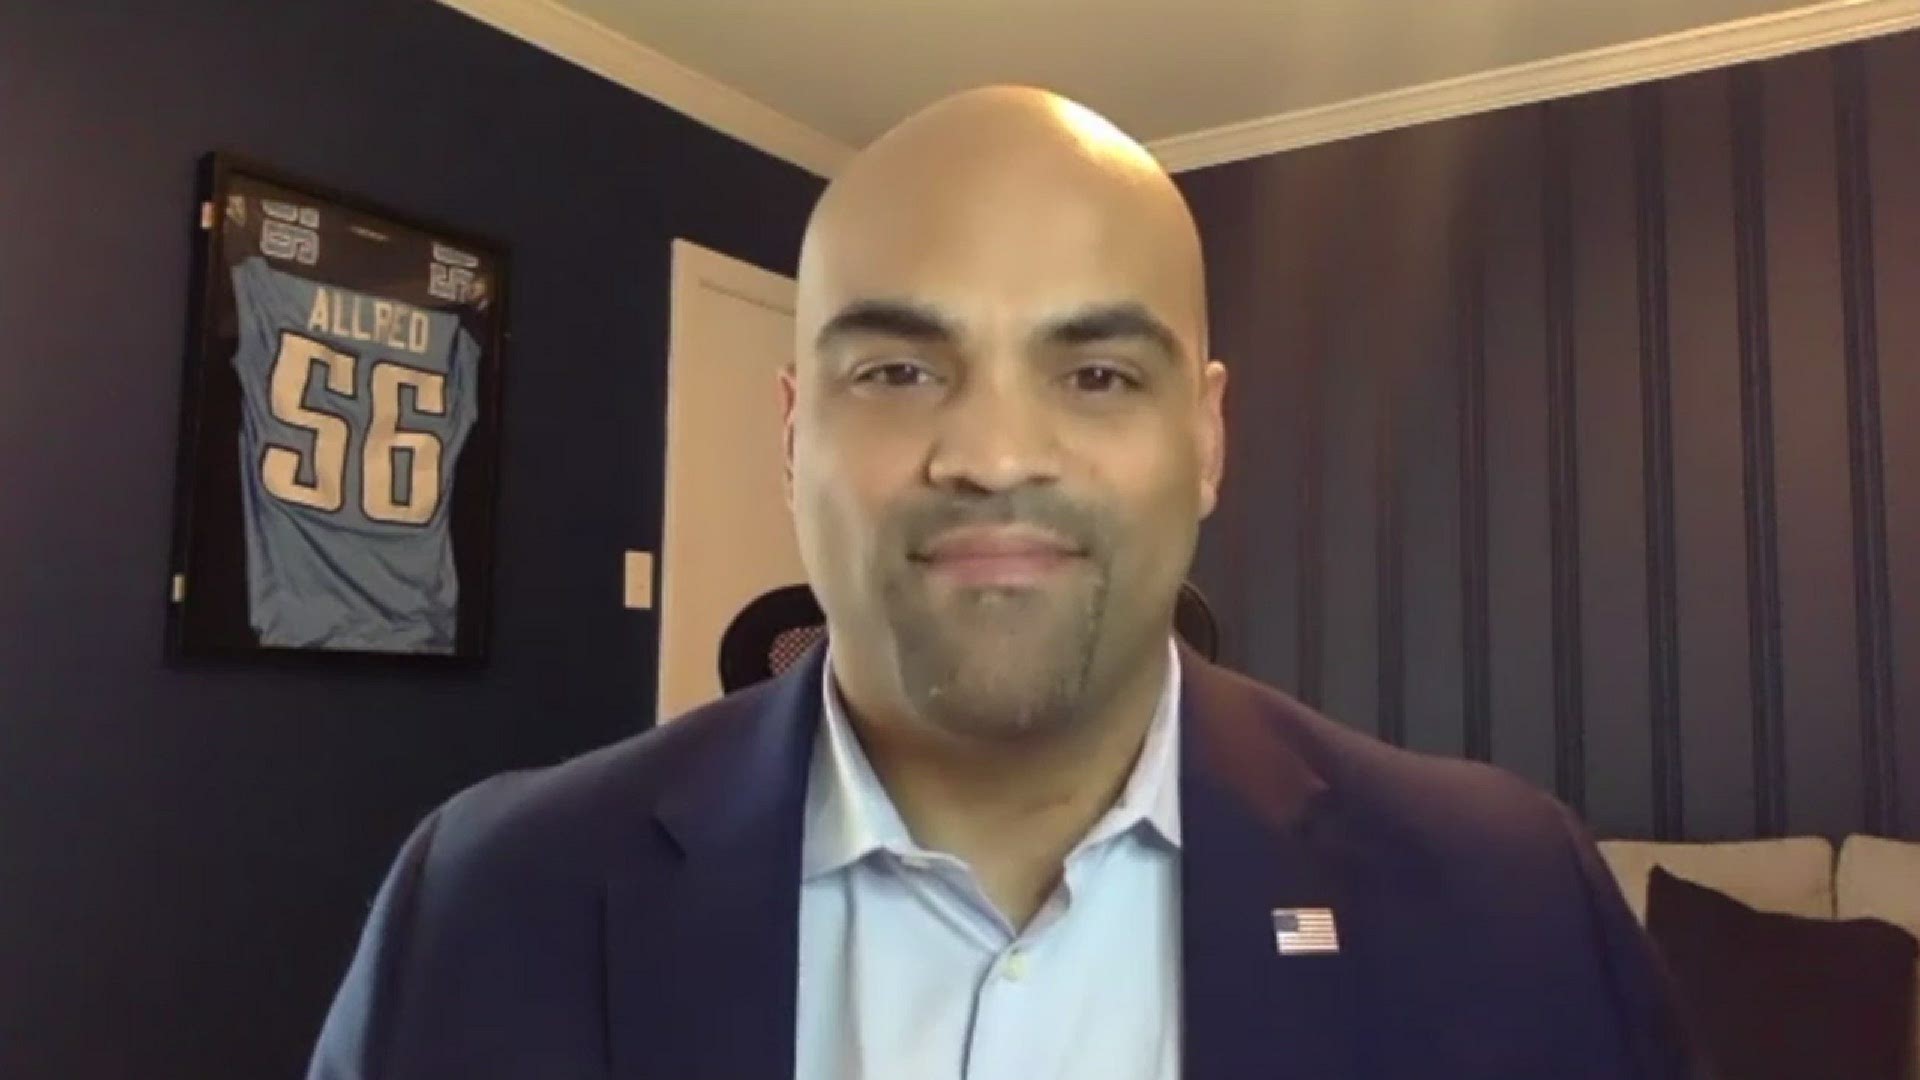 “Why was Dallas’ skyline lit up while Dallas residents were literally freezing in their homes. That’s unacceptable,” said U.S. Rep. Colin Allred, D-Dallas.